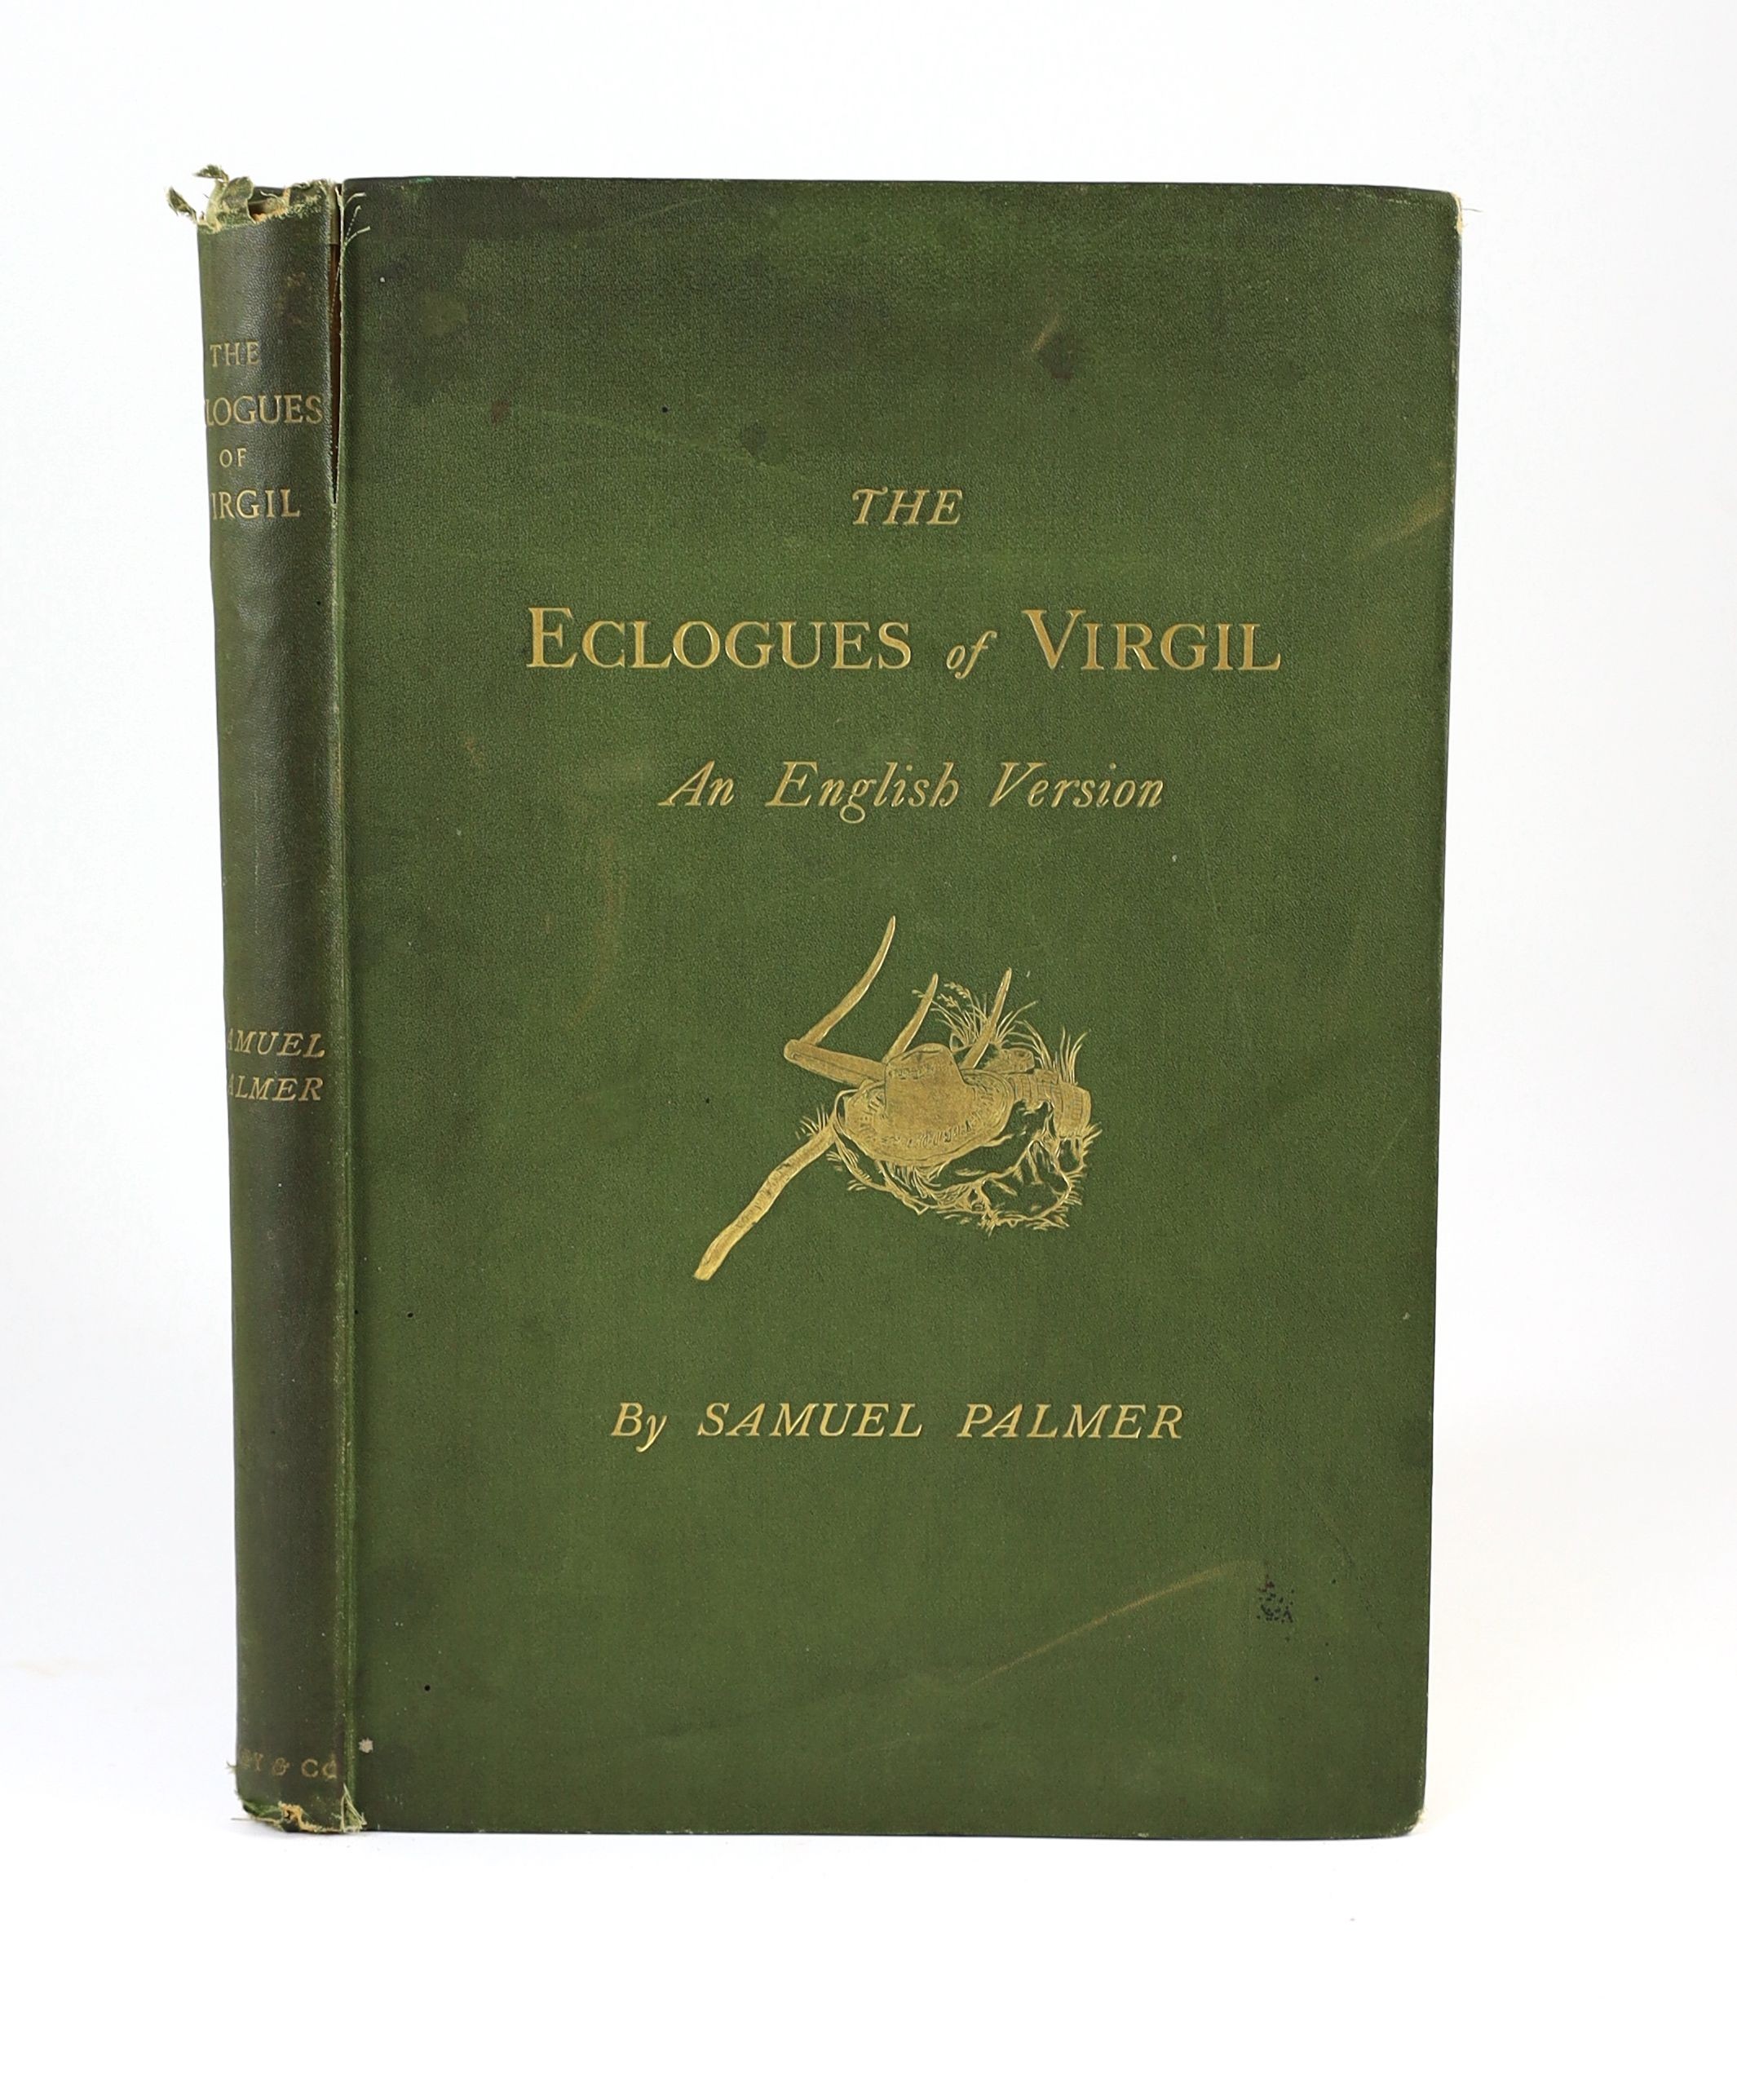 Vergilius Maro, Publius, - The Eclogues of Vergil, an English Version, illustrated by Samuel Palmer, with 14 plates, including 5 original etchings, folio, green cloth gilt, Seeley & Co; London, 1883